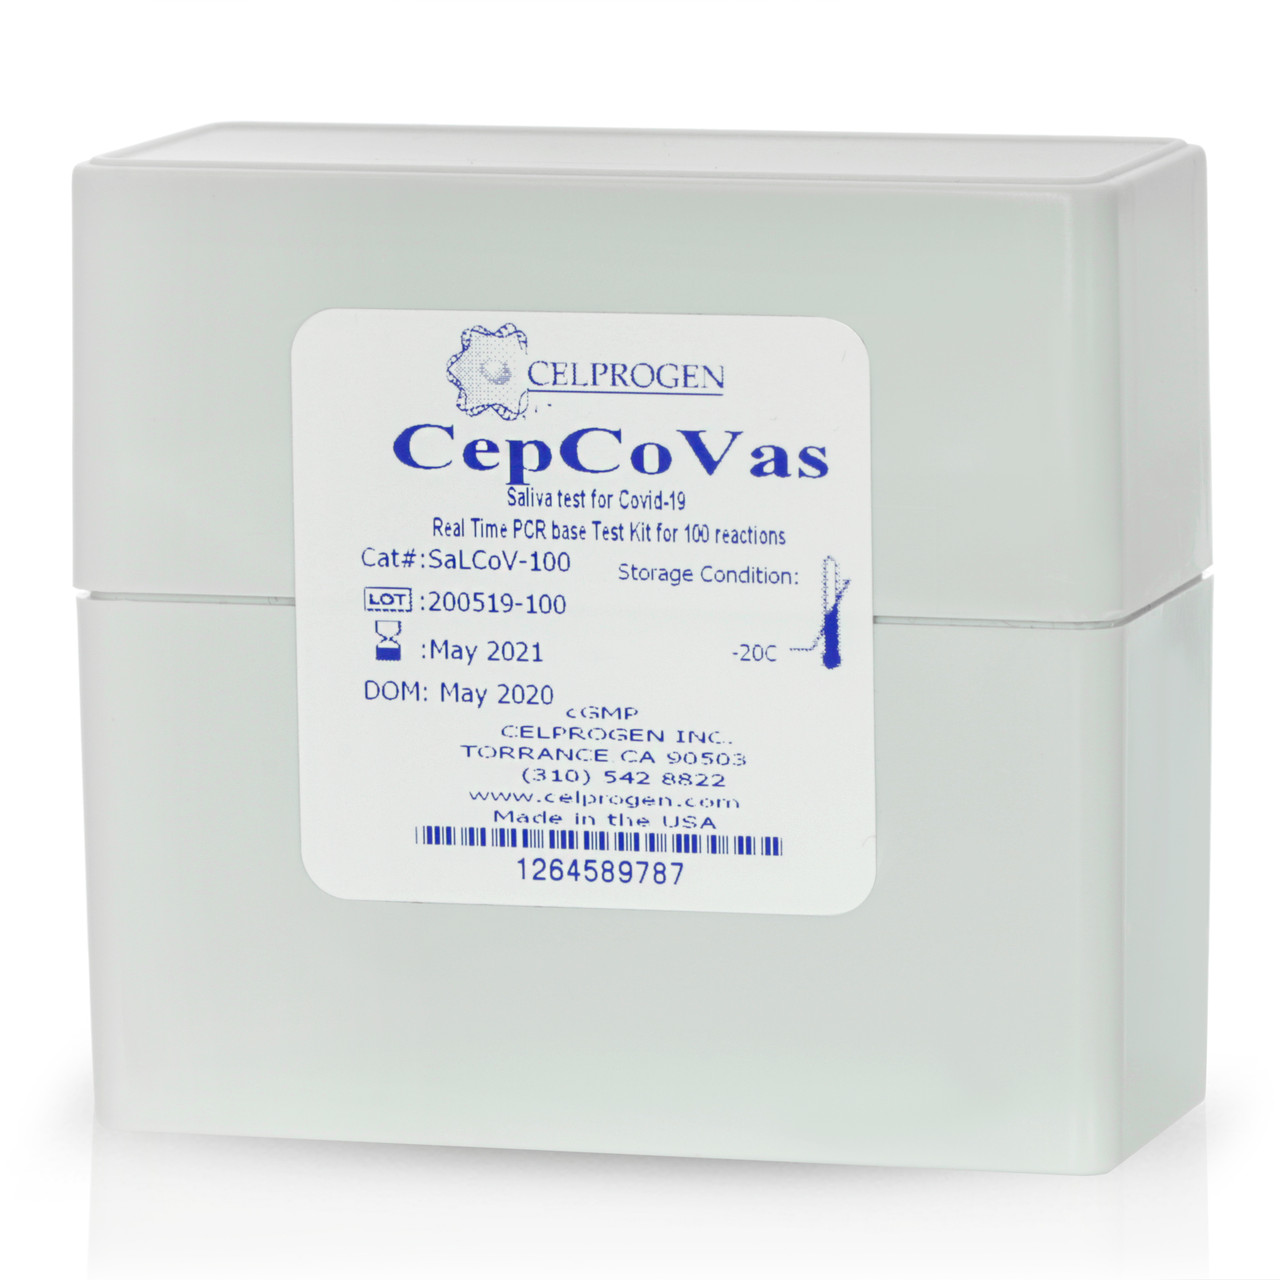 COVID-19 RT-PCR Saliva test kit for 100 reactions